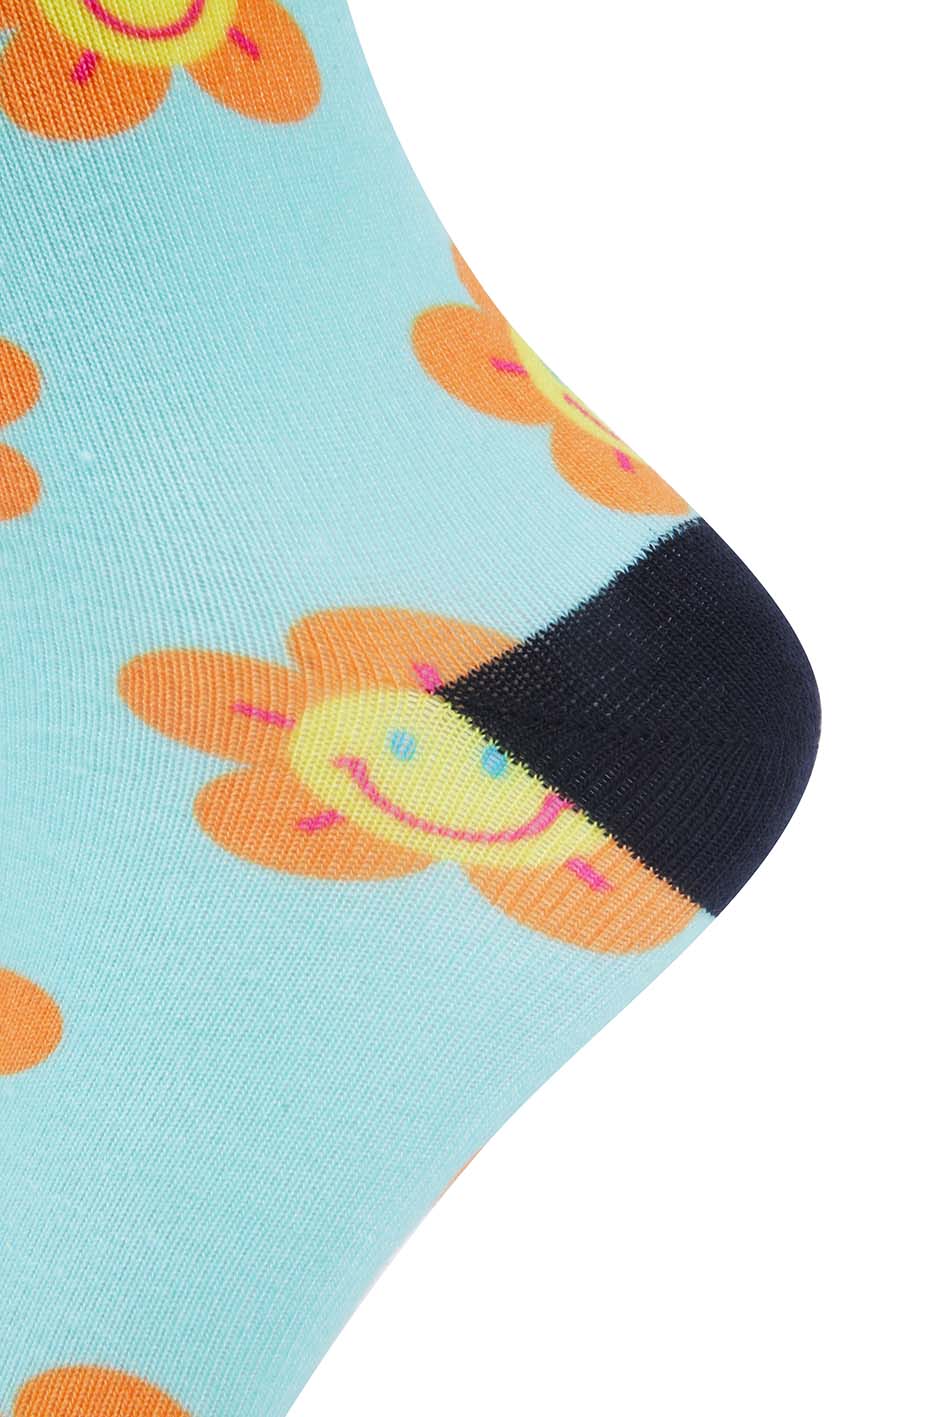 Daisy Smiley Printed Sock (3 Colors)